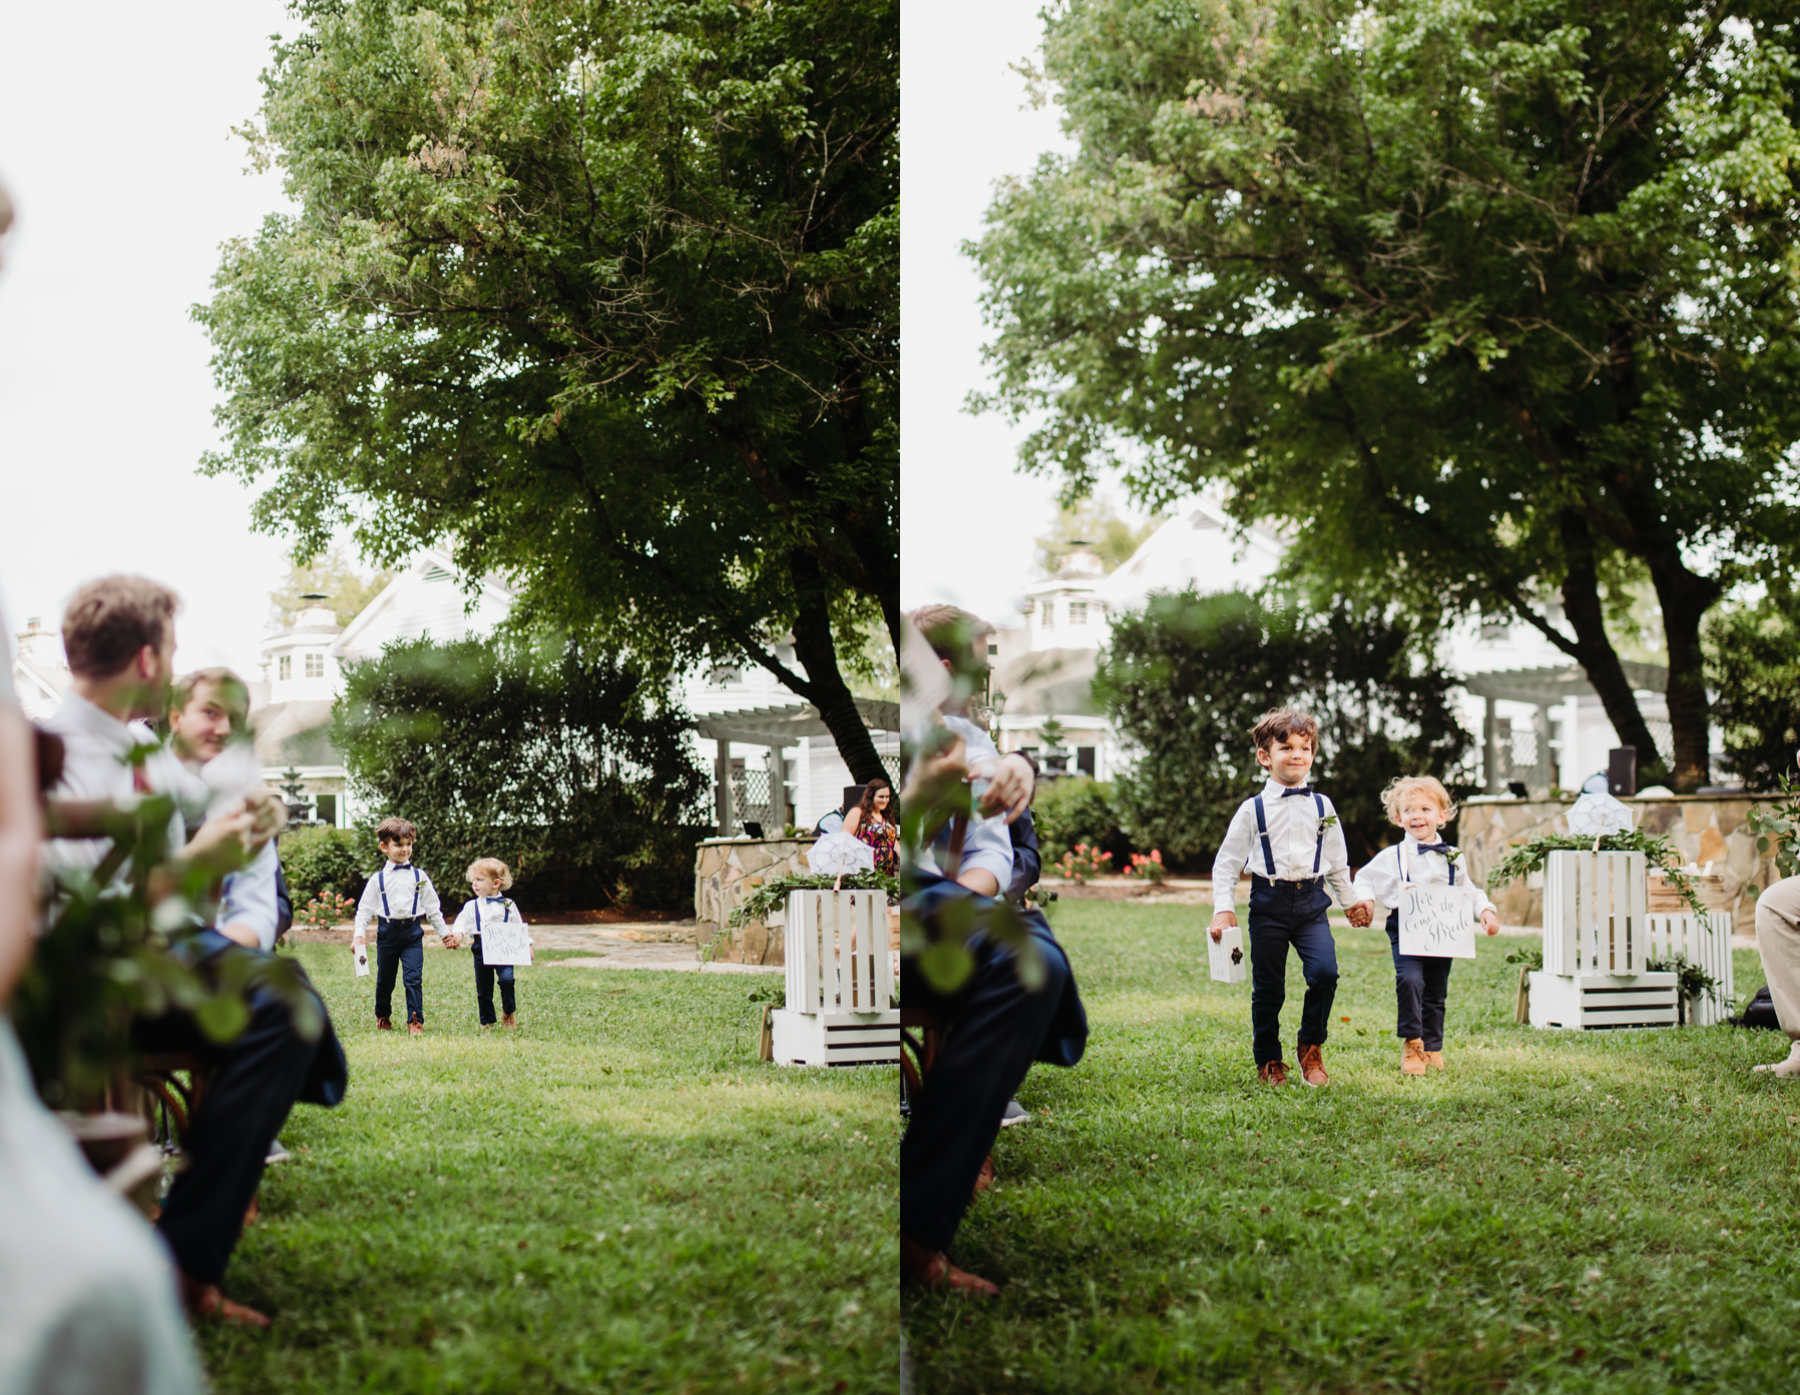 Little ring-bearers coming down the aisle at a Sunny summer wedding at Dara's Garden in Knoxville, Tennessee 